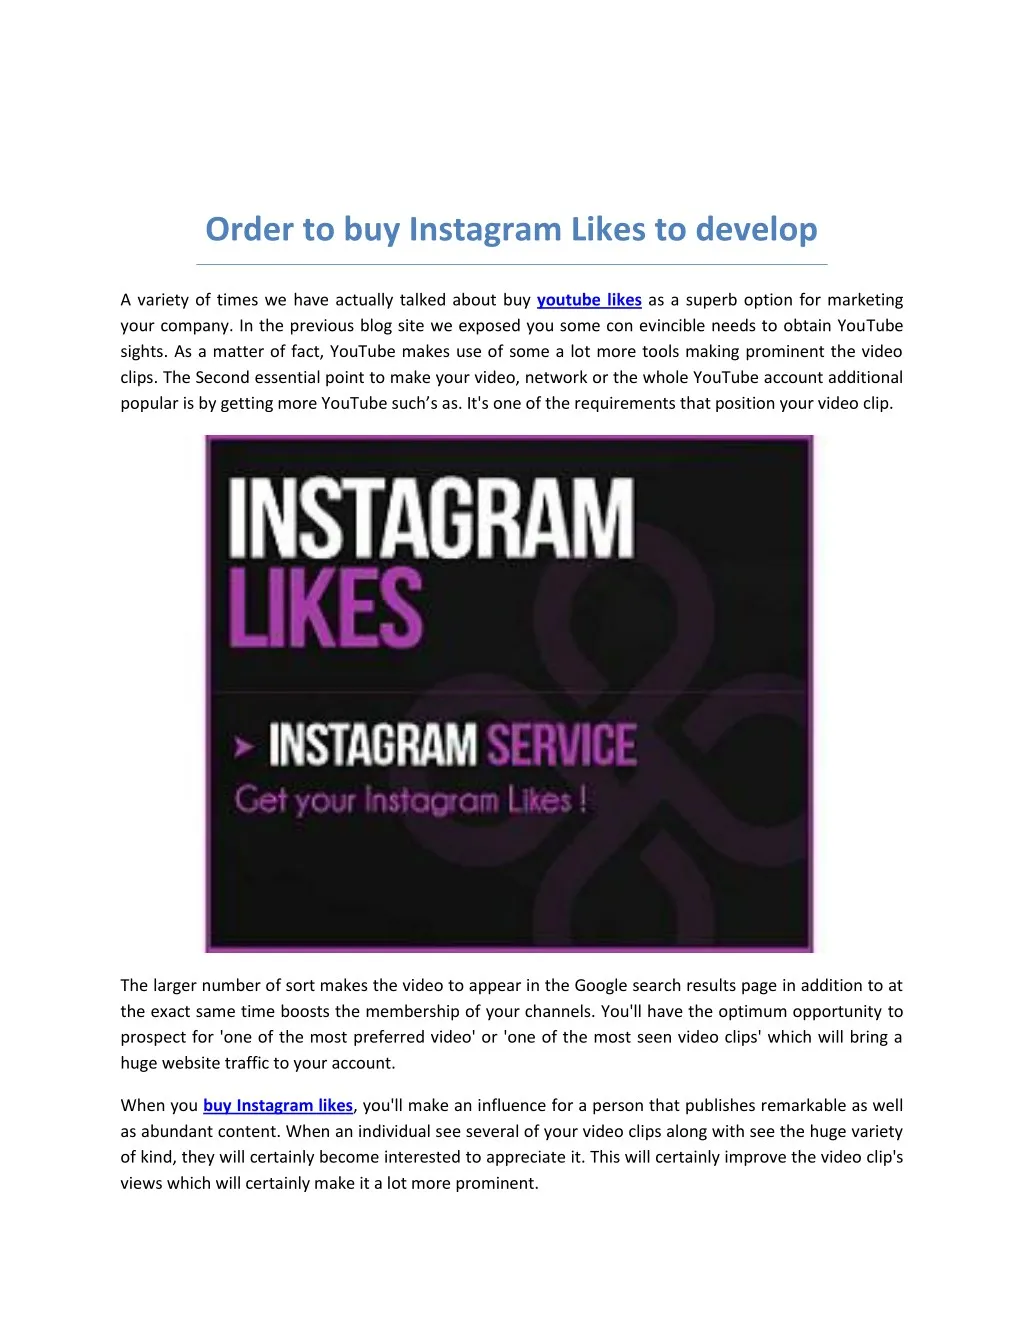 order to buy instagram likes to develop